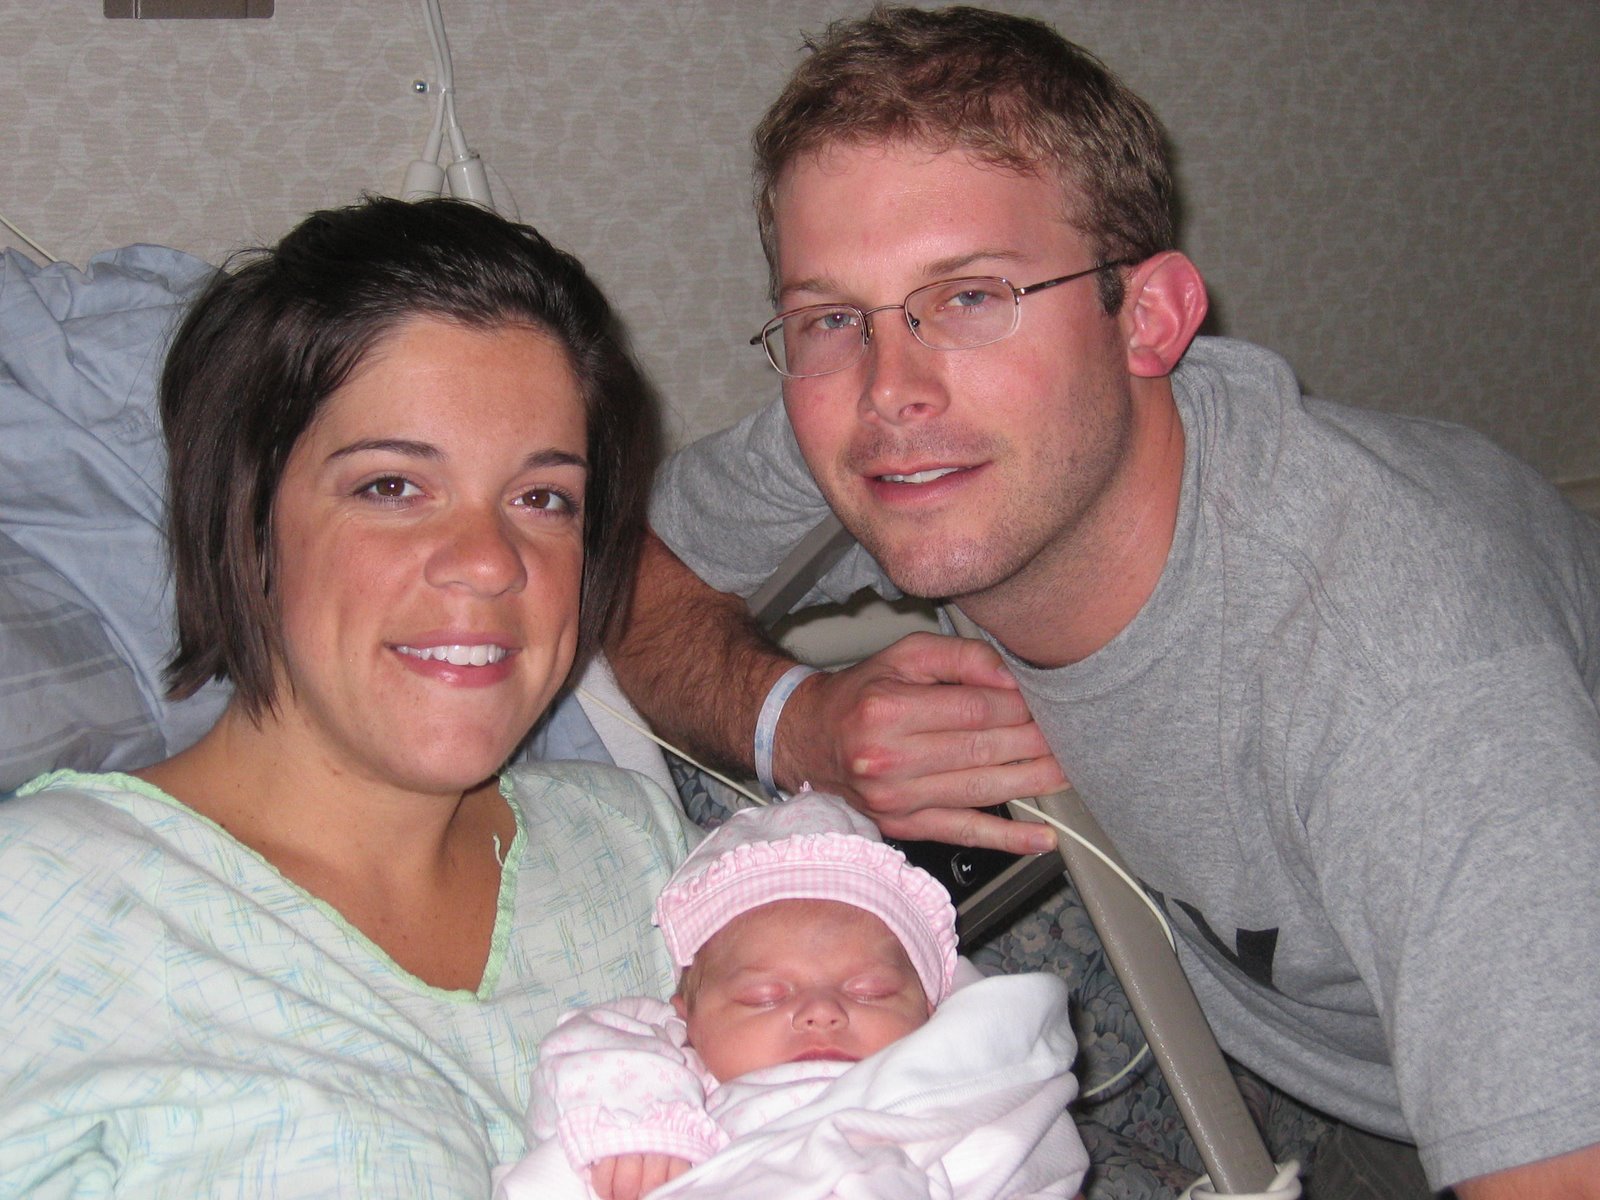 [Mary+Reese+15+hours+old+005.JPG]